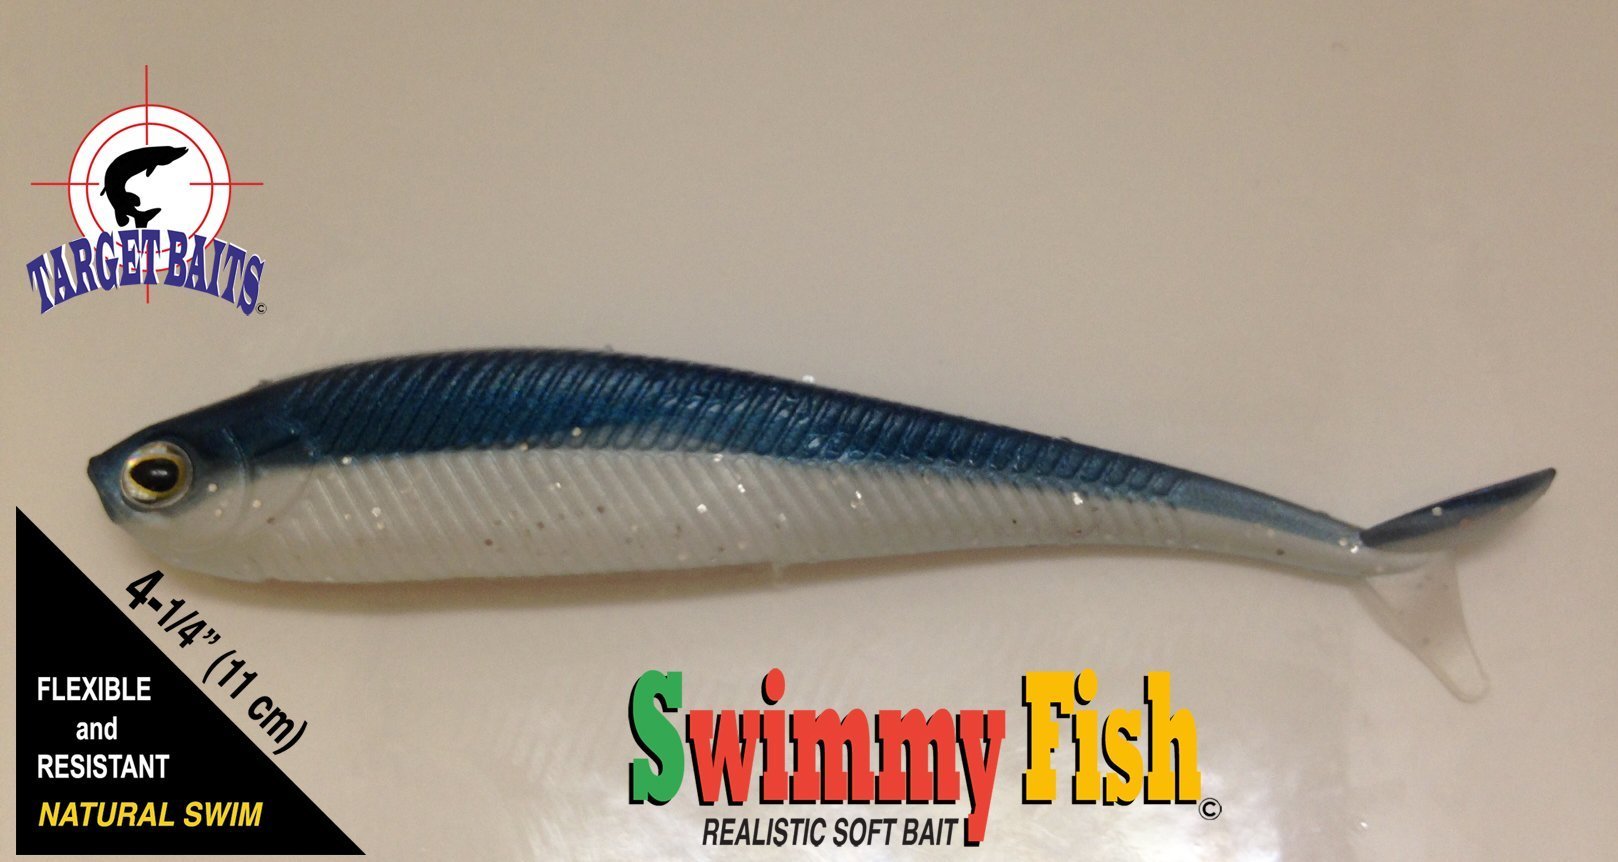 Swimmy Fish 4.25 inches – Target Baits Leurres